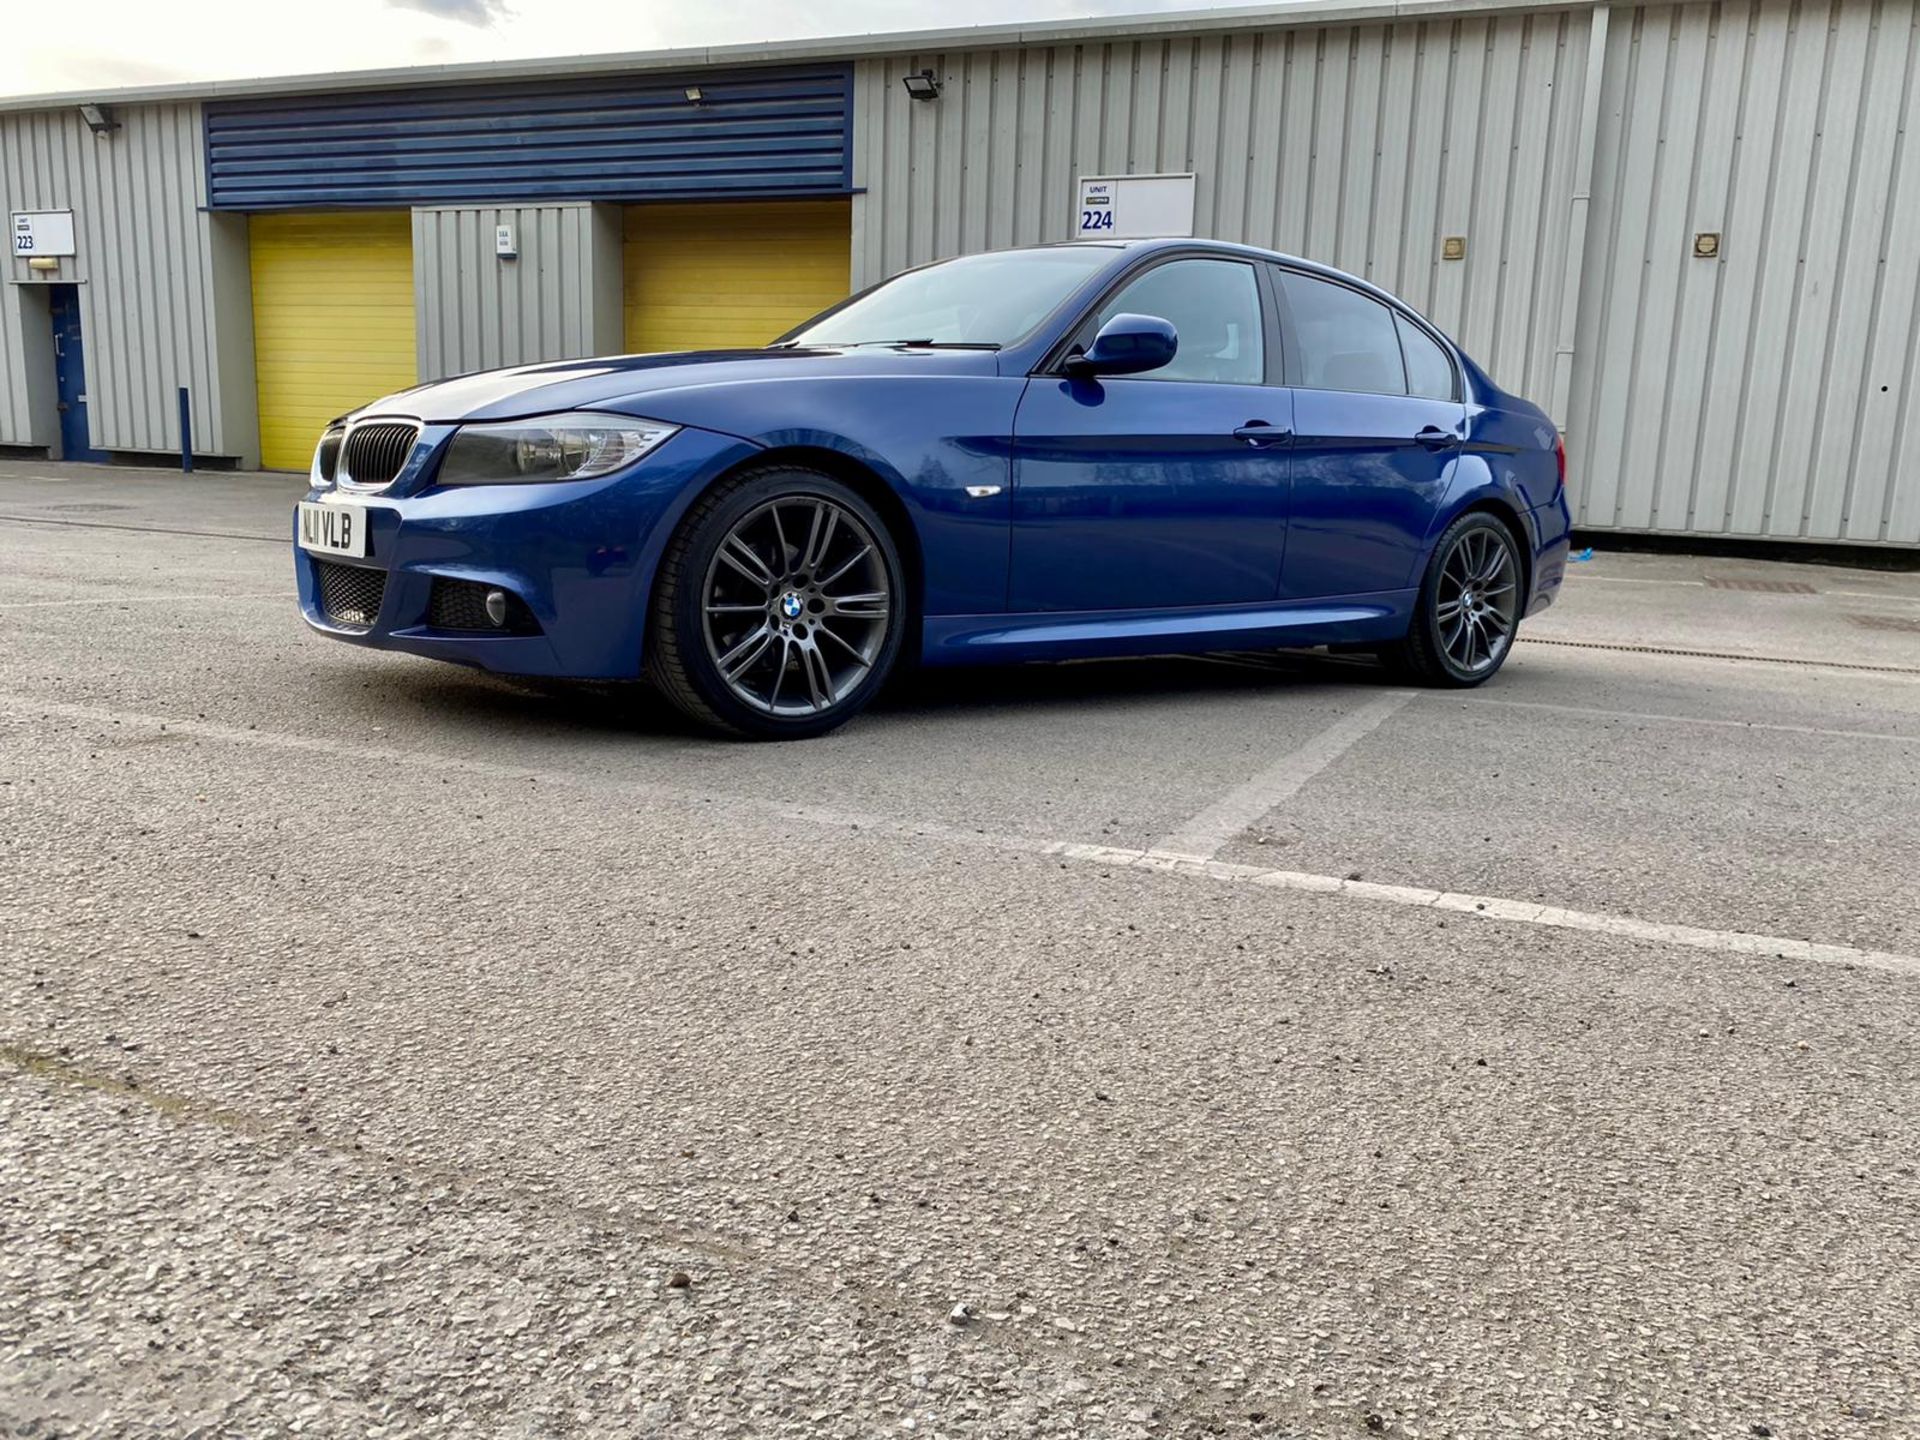 2011 BMW 318I SPORT PLUS EDITION BLUE SALOON, NEW TMING CHAIN, NEW 2 PIECE CLUTCH KIT *NO VAT* - Image 5 of 15